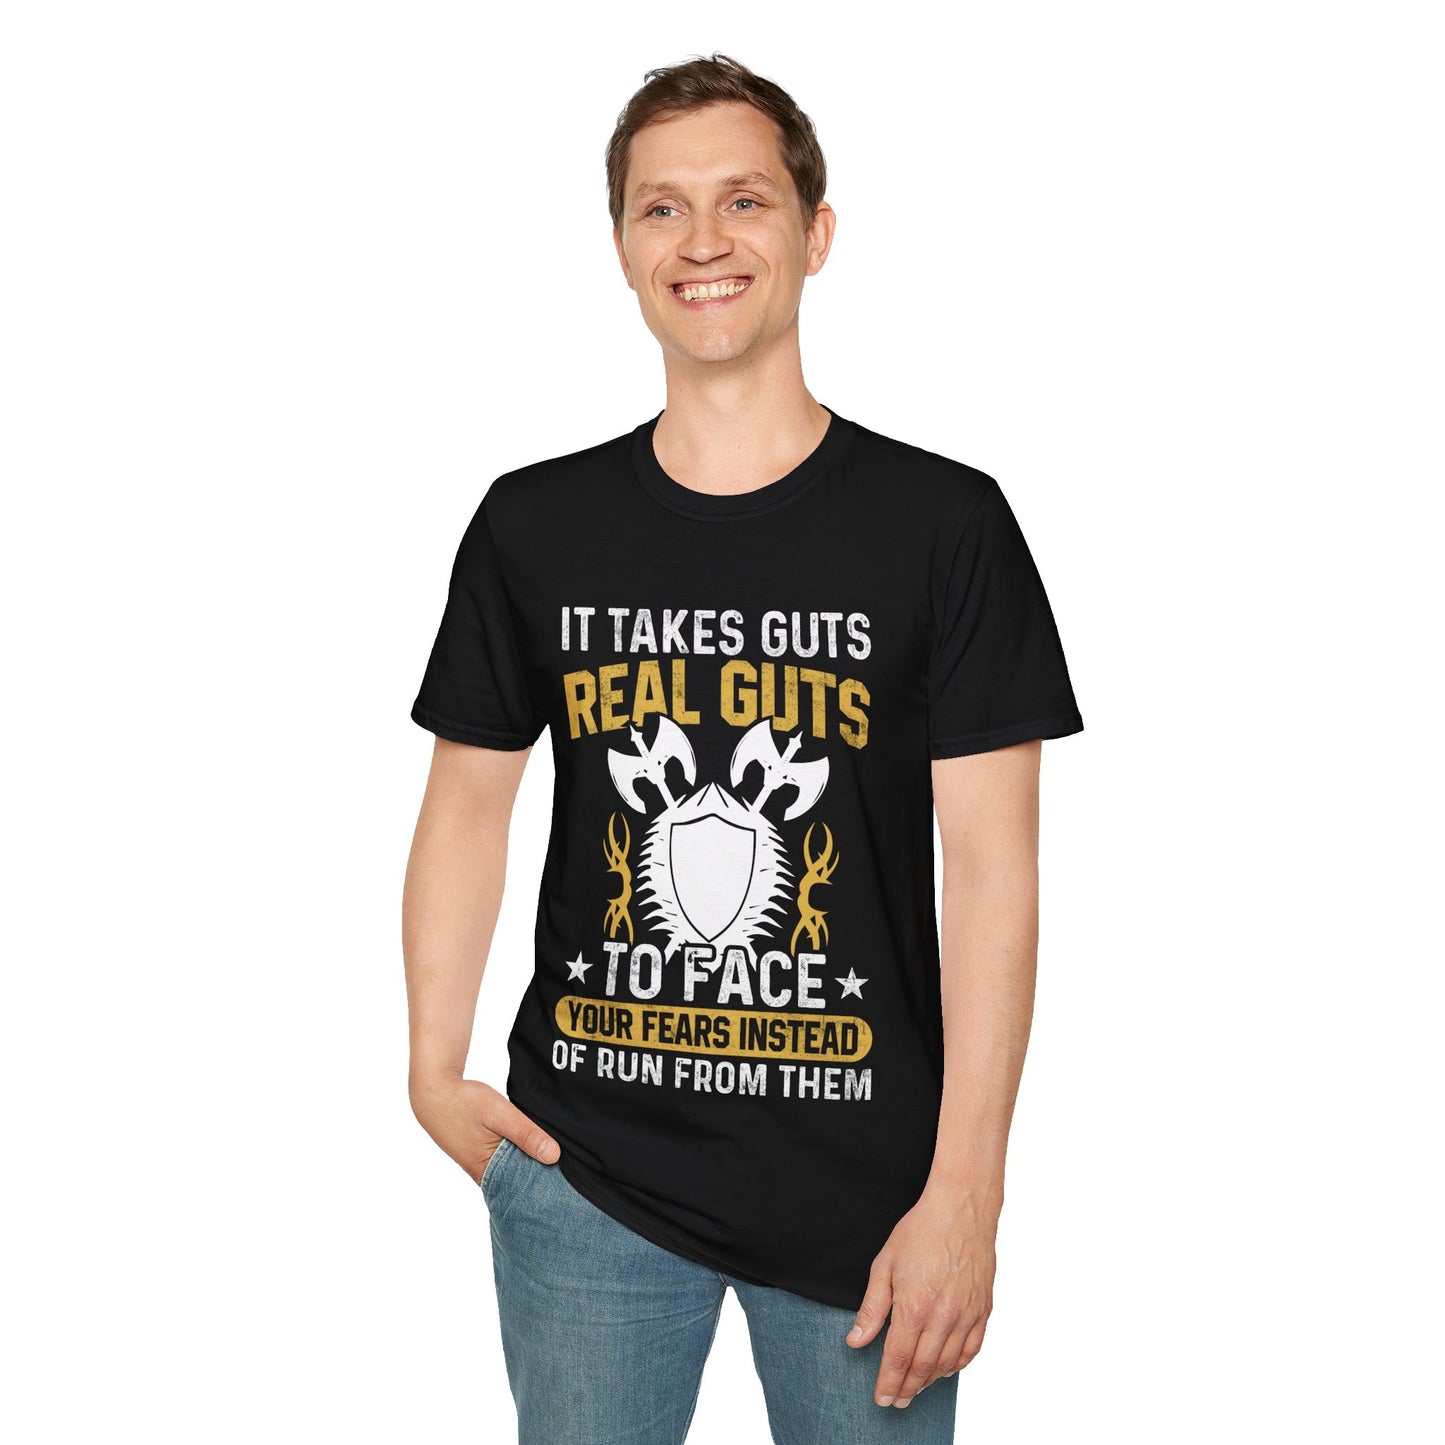 It Takes Guts Real Guts To Face Your Fears Instead Of Run From Them Viking T-Shirt